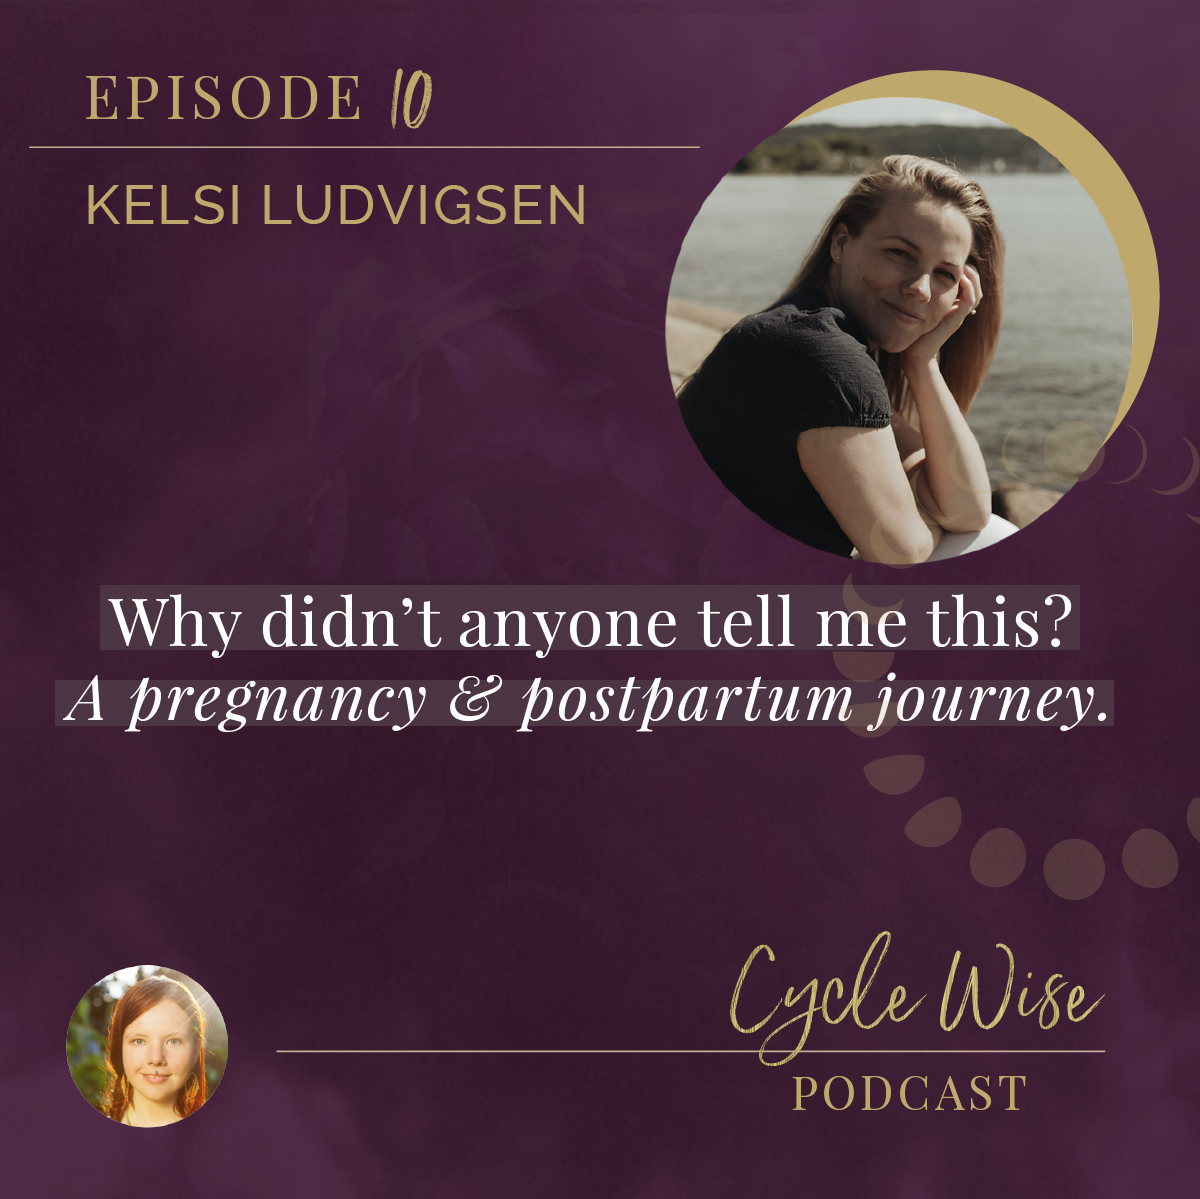 Why didn't anyone tell me this? A pregnancy and postpartum Journey with Kelsi Ludvigsen